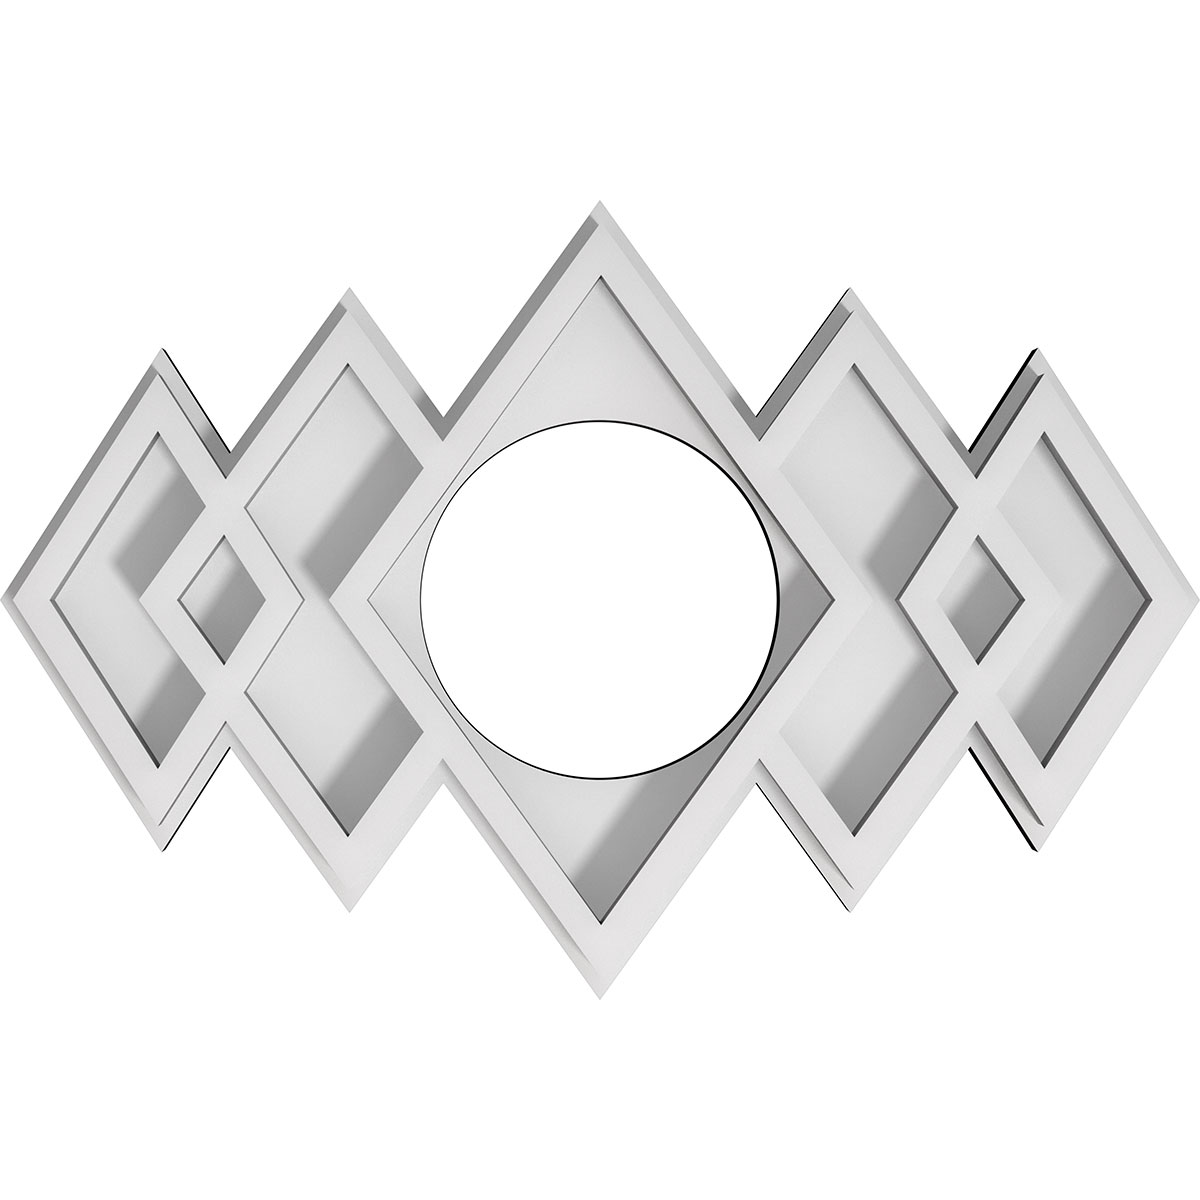 Cmp10x6ze-03000 3 In. Id X 3 In. Rectangle Zoe Architectural Grade Pvc Contemporary Ceiling Medallion